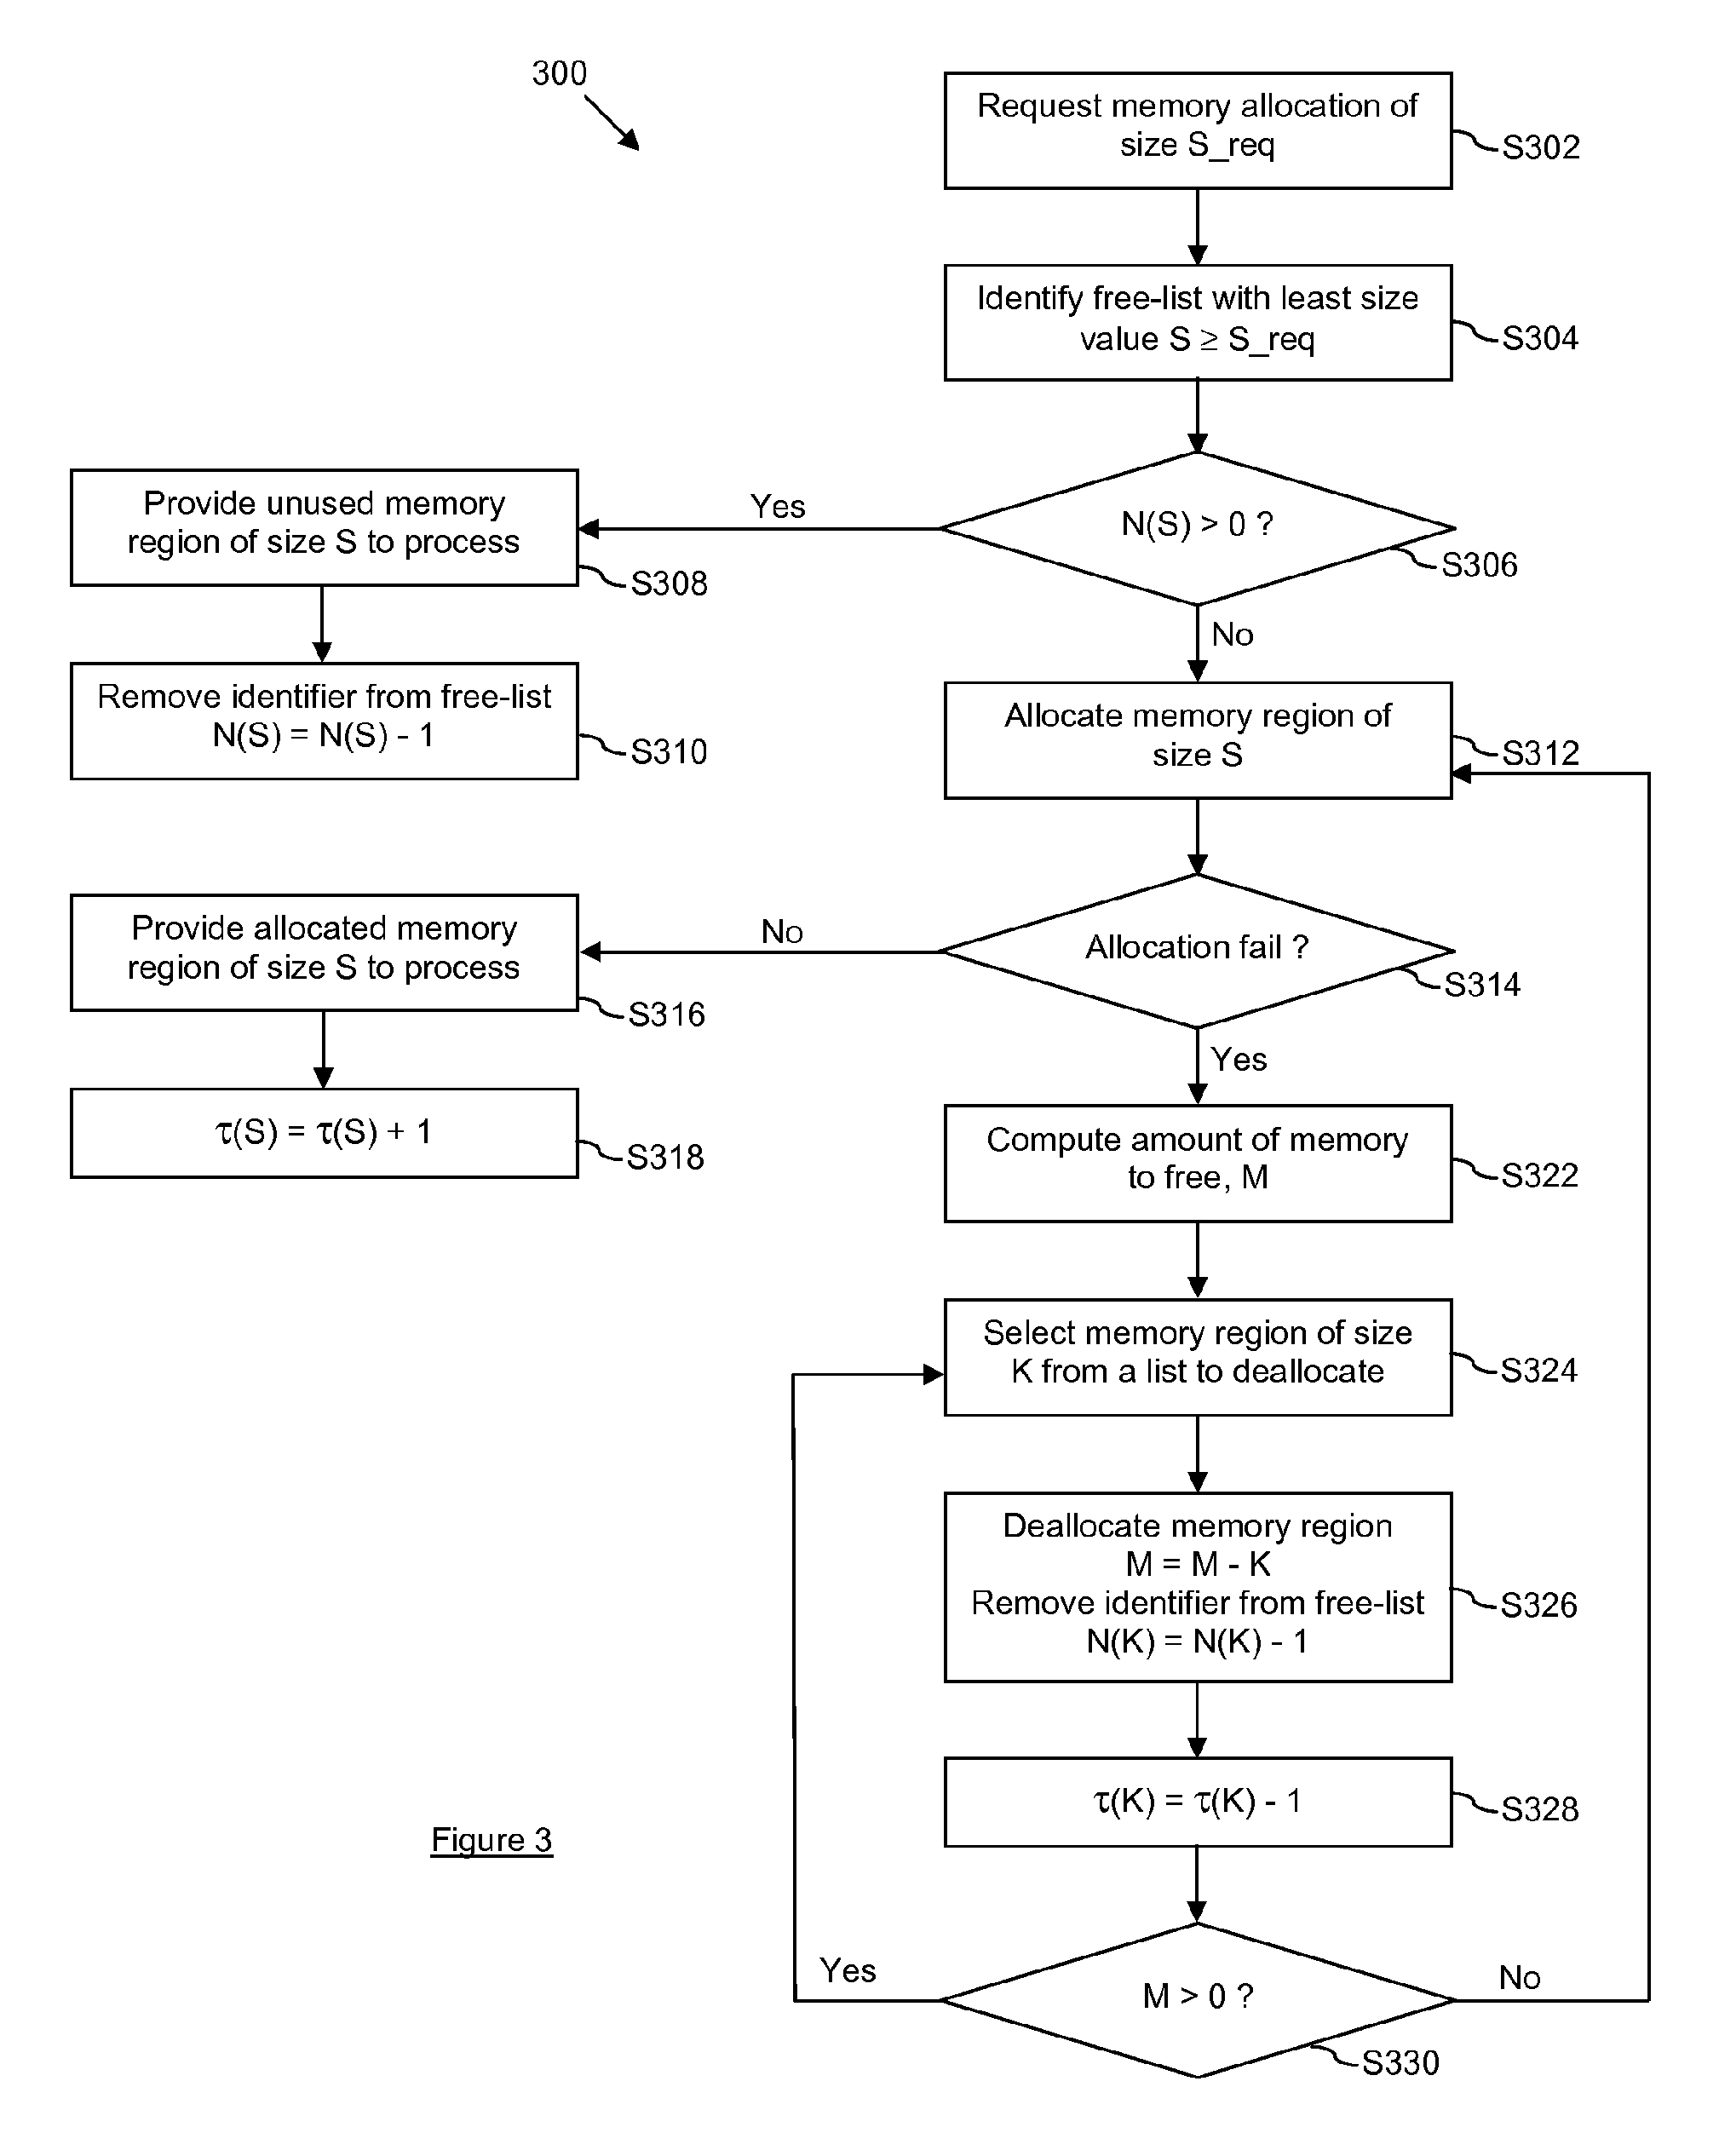 Memory management and method for allocation using free-list